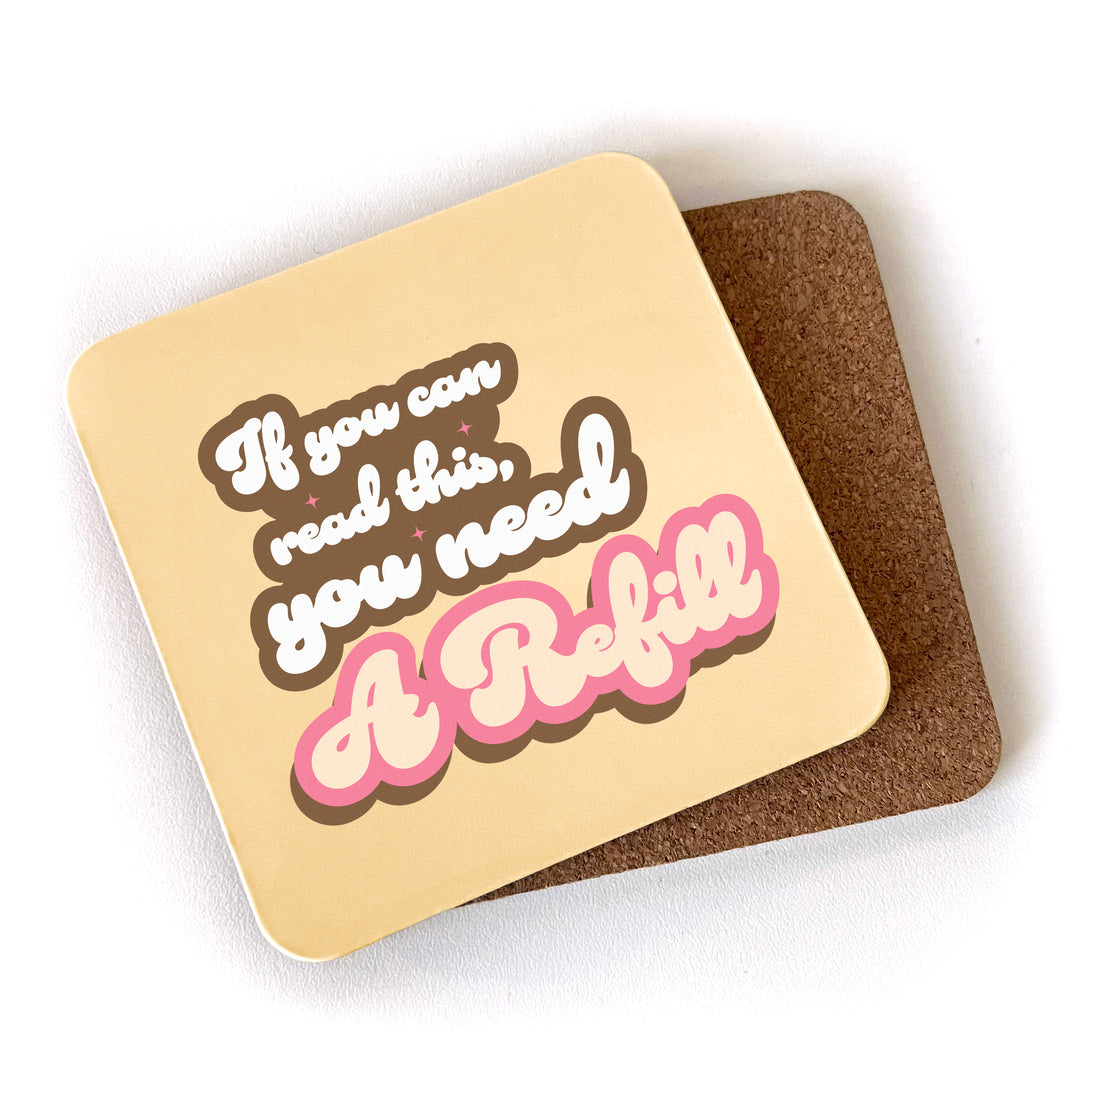 Coaster: Salty, If You Can Read This, You Need a Refill - Pack of 6